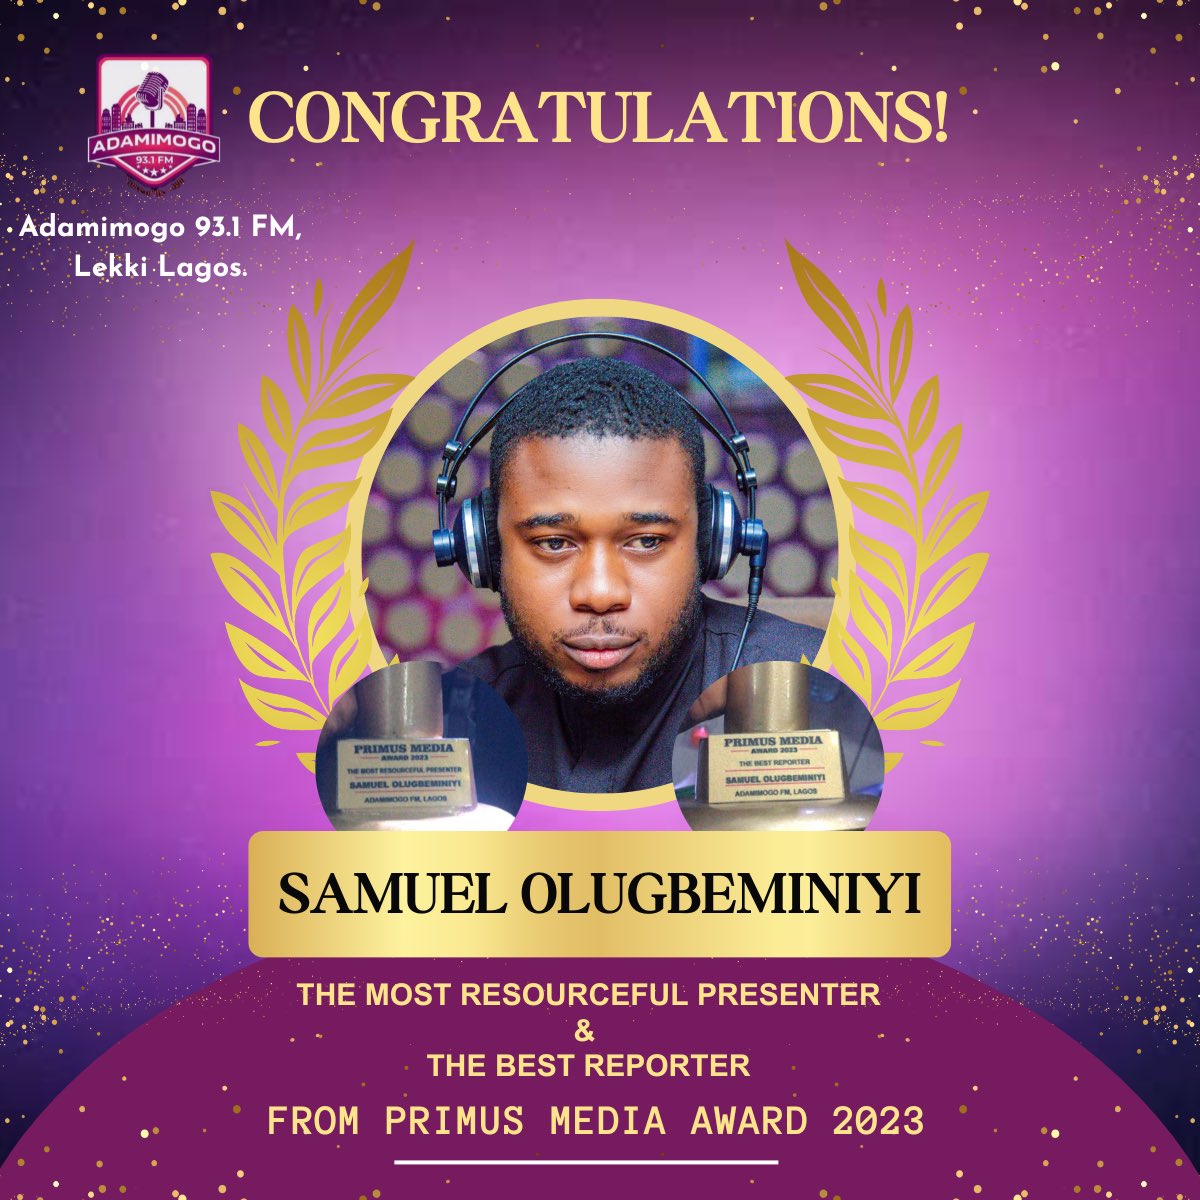 Congratulations to Samuel Olugbeminiyi @ceasarolu on receiving double recognition from @primusmediacity for Most Resourceful Presenter, South West Nigeria and Best Reporter, South West, Nigeria.

Unto the next level.
#adamimogofm #adamimogo931fm